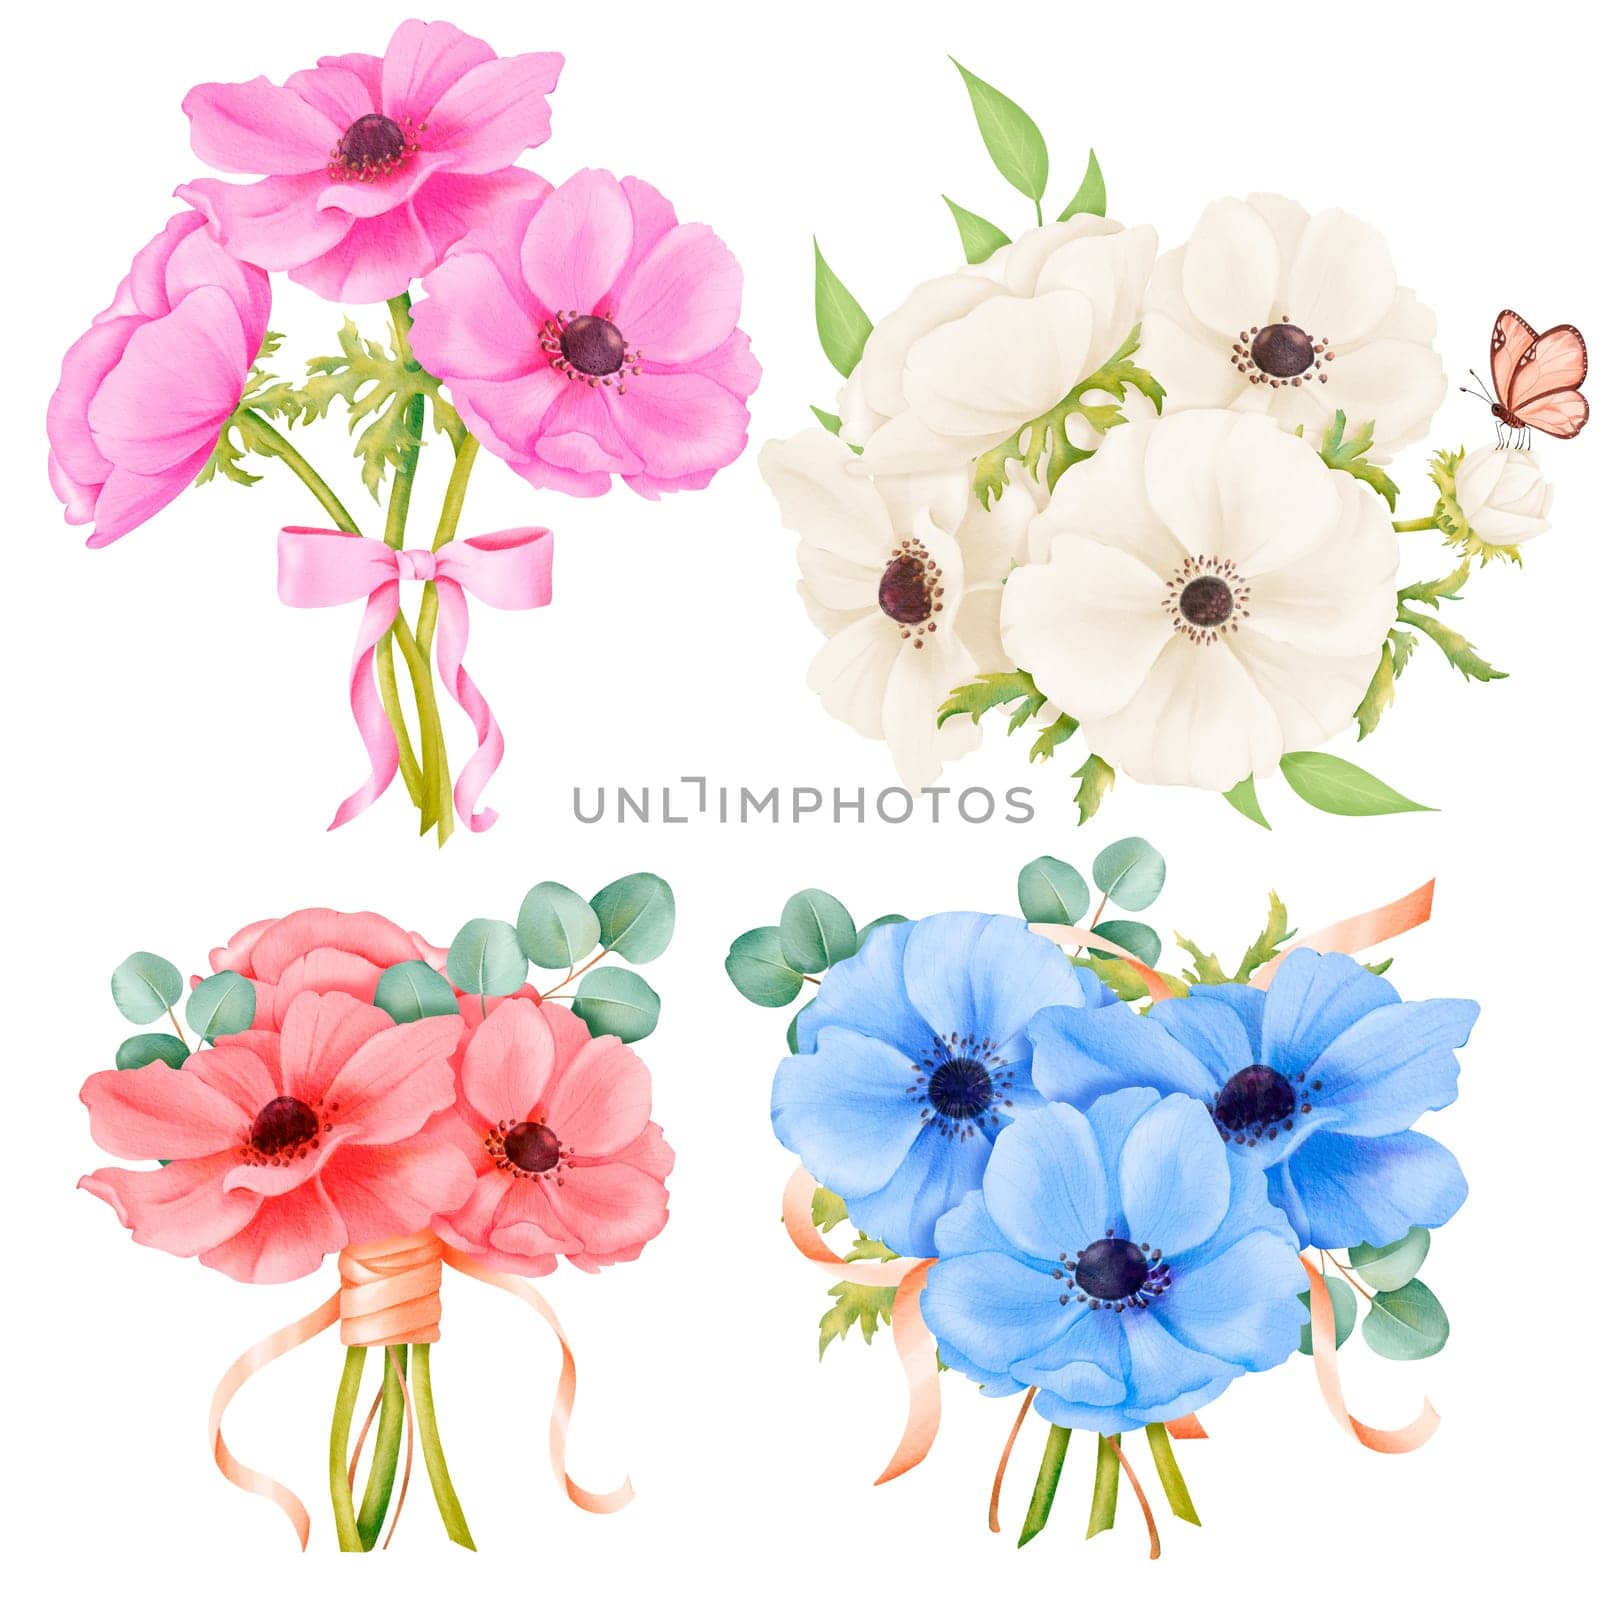 Watercolor collection anemone bouquets in assorted hues with satin ribbons, butterflies, and eucalyptus sprigs. for wedding invitations, event stationery, floral arrangements decorative backgrounds.